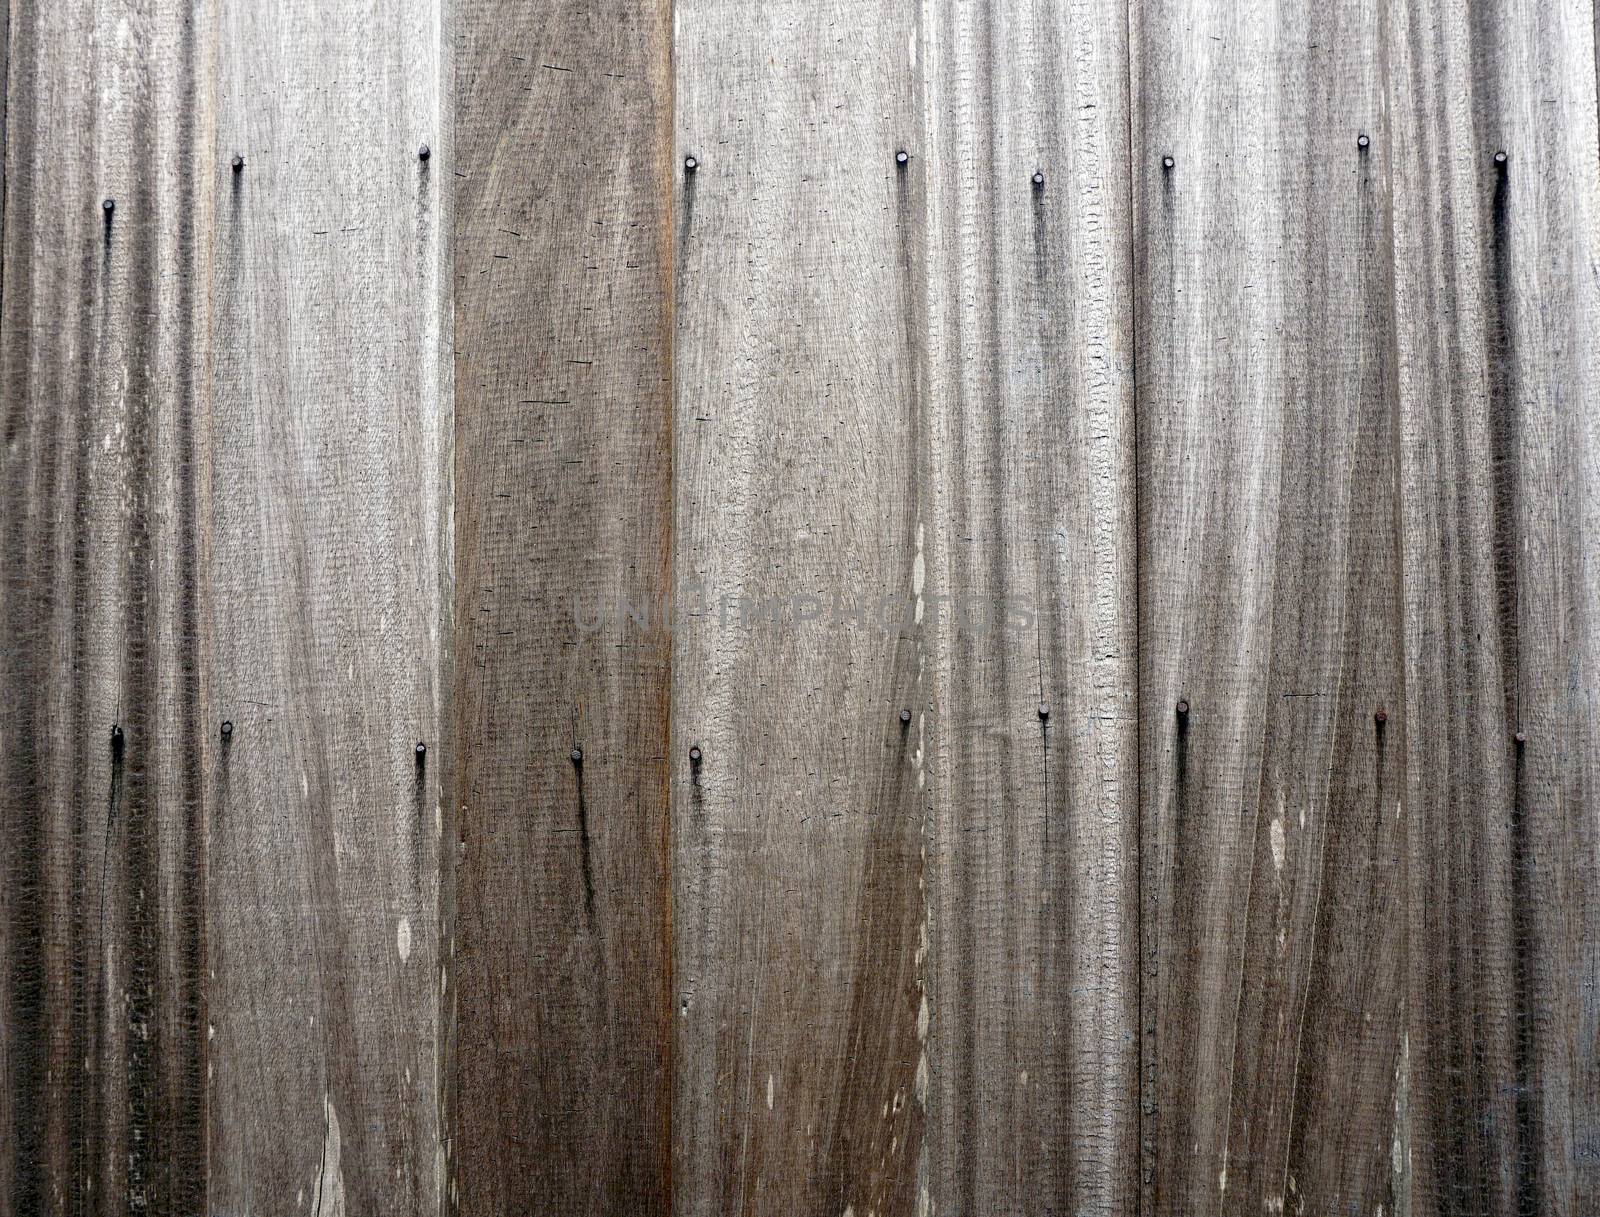 Wooden strips wall with rivets vernecular outdoor material             